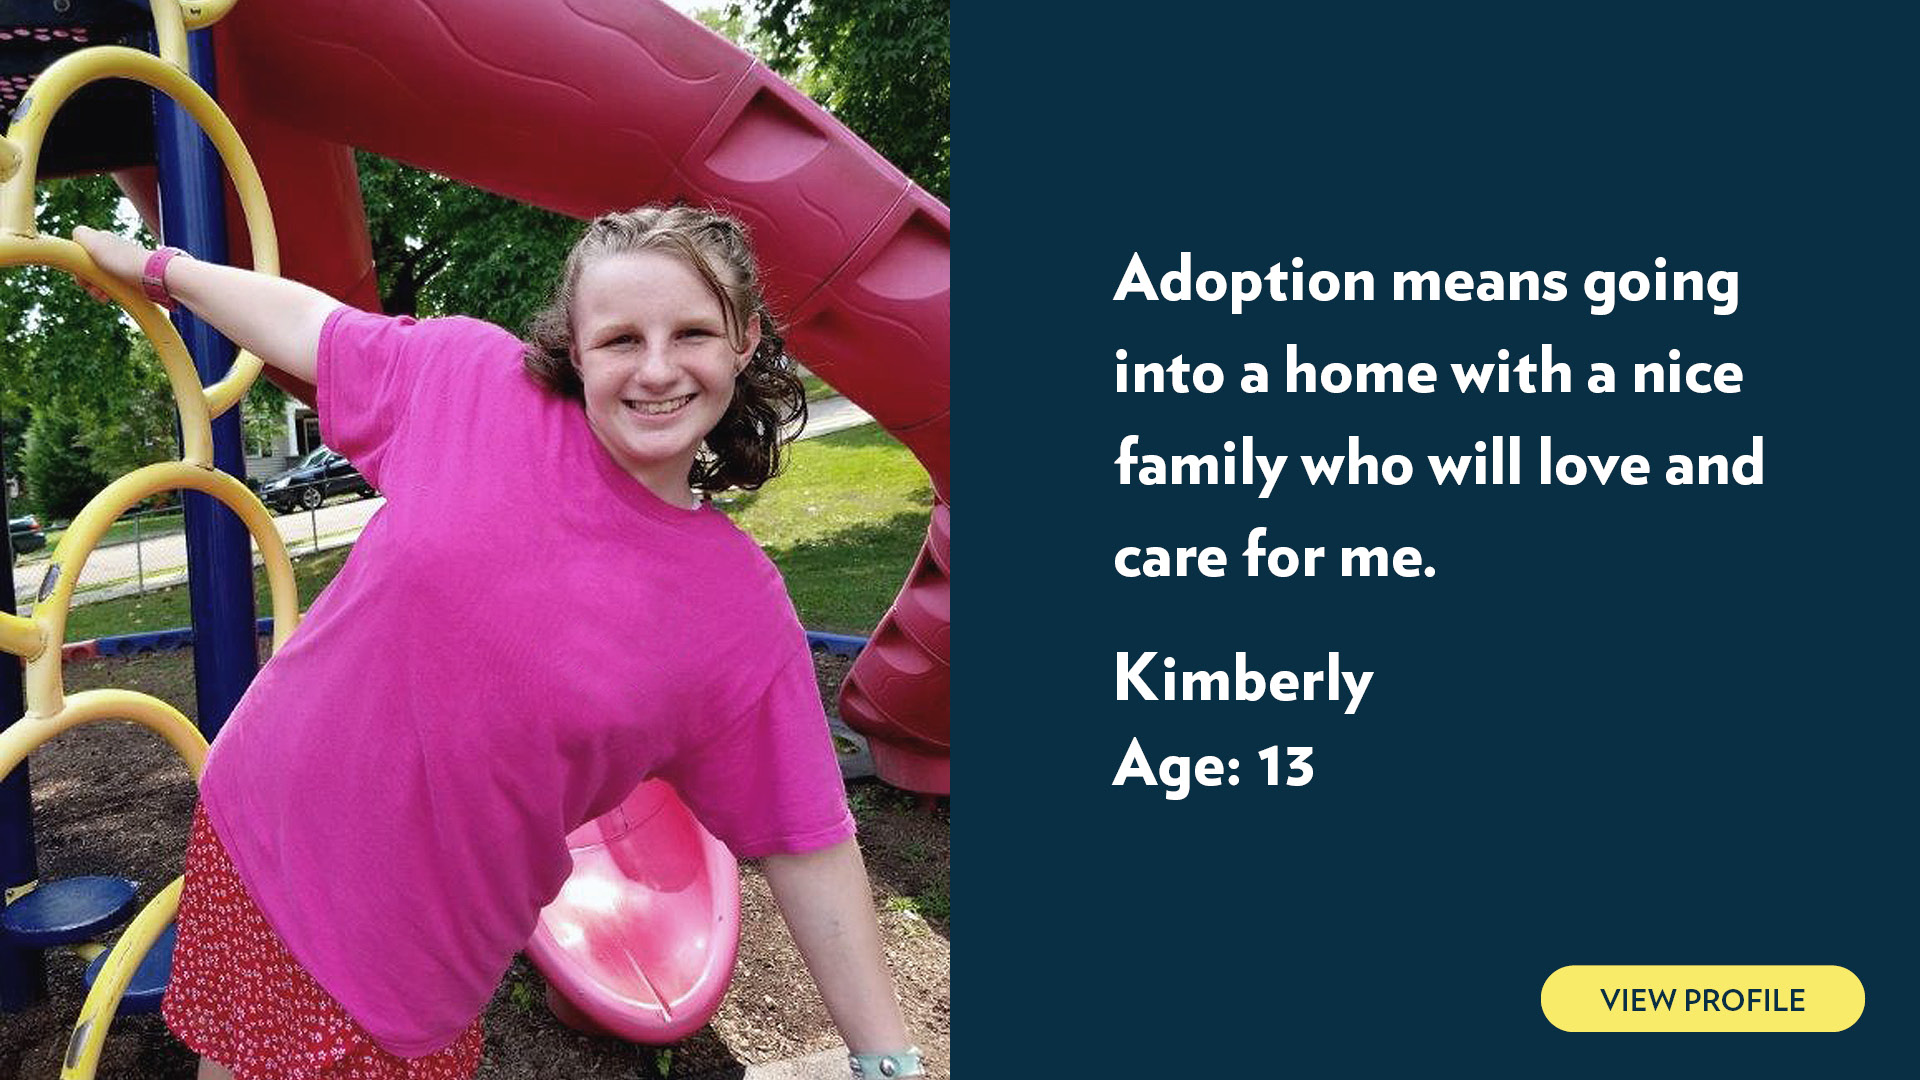 Kimberly, age 13. Adoption means going into a home with a nice family who will love and care for me. View profile.